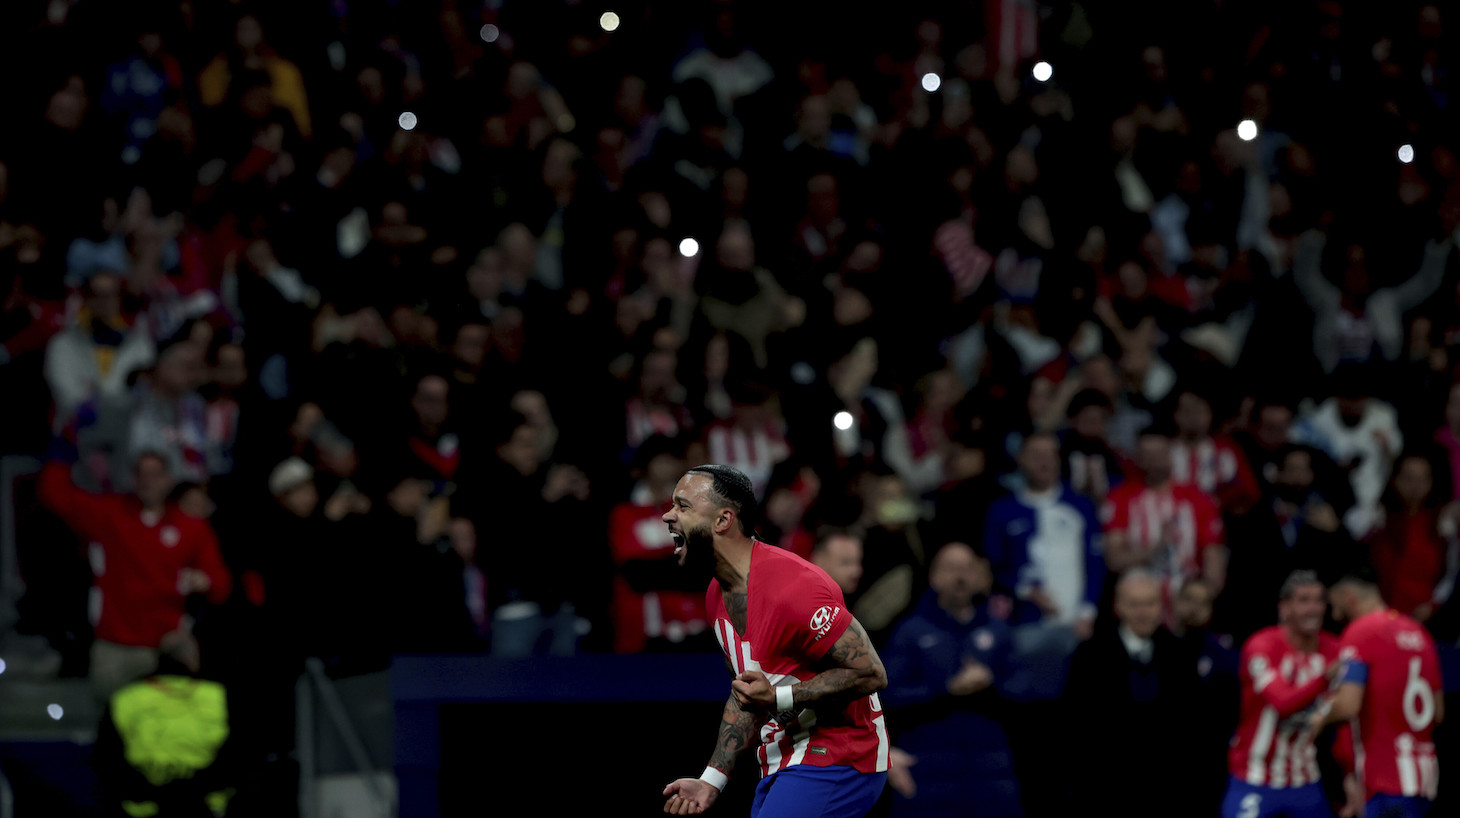 Atletico de Madrid player Memphis Depay celebrates his goal.. Atletico de Madrid beats Internazionale Milan in round of 16 of Champions League matchday 2 of 2 and moves on to next phase.